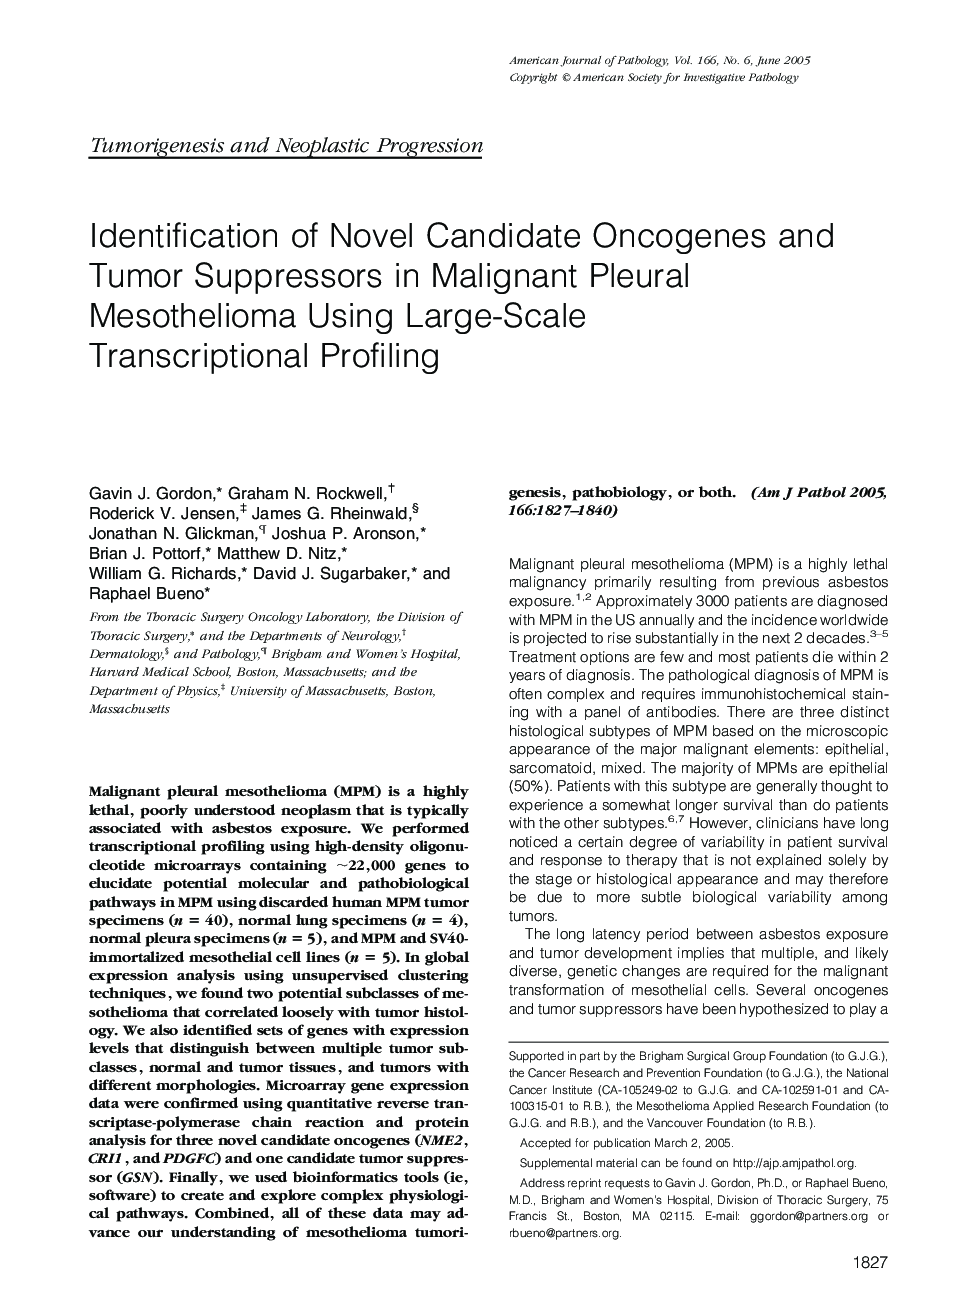 Identification of Novel Candidate Oncogenes and Tumor Suppressors in Malignant Pleural Mesothelioma Using Large-Scale Transcriptional Profiling